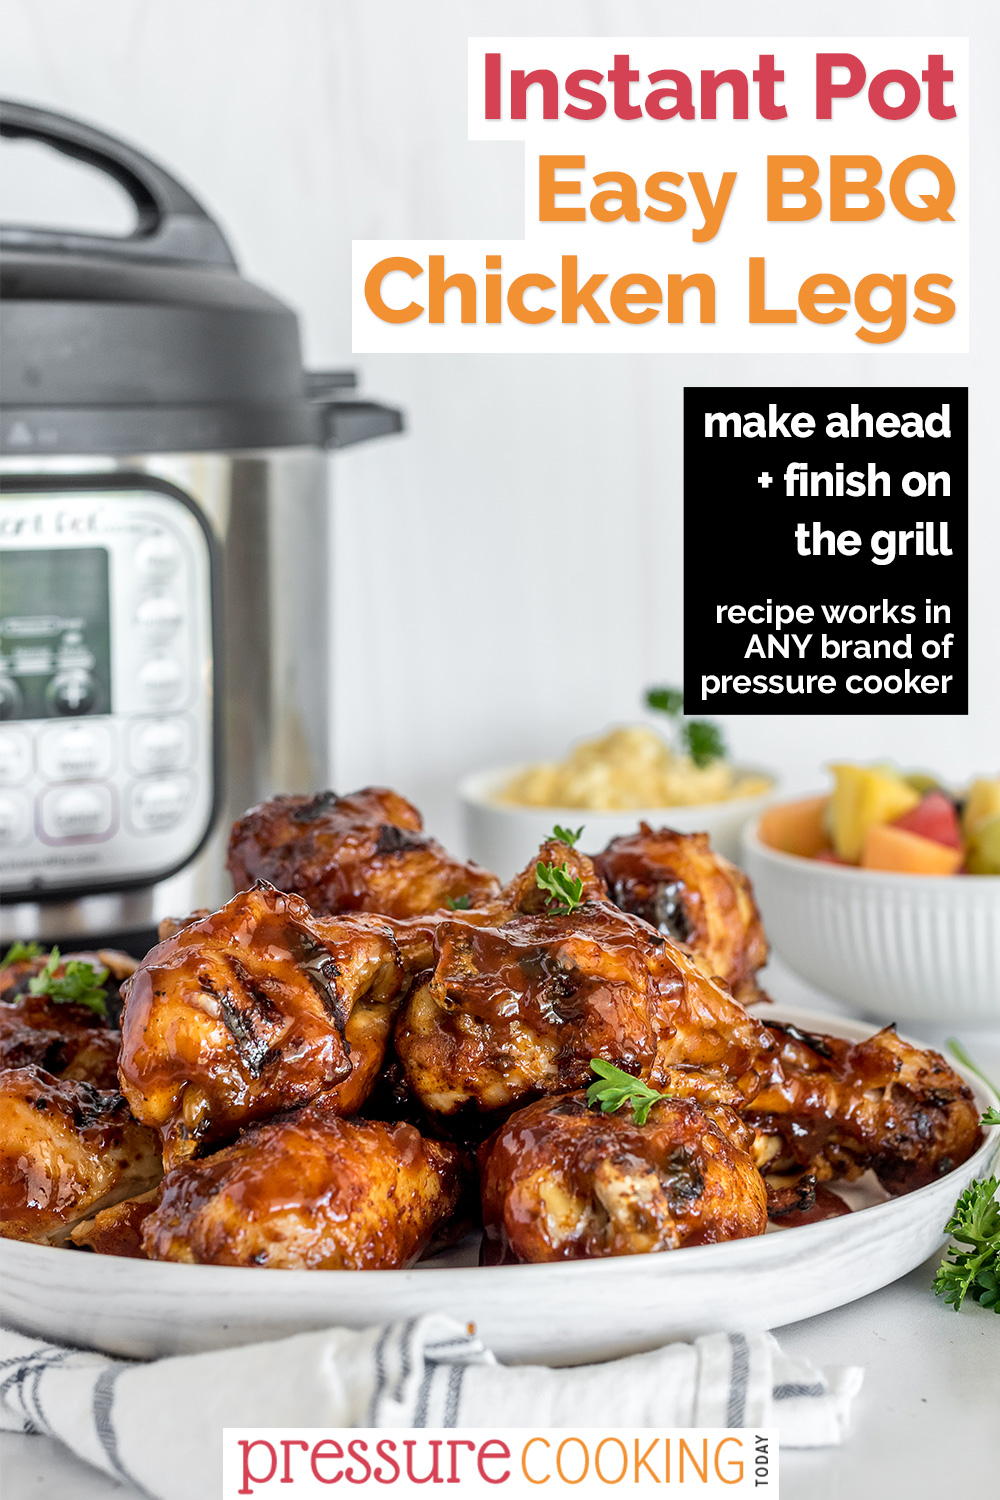 Pinterest image showing an Instant Pot and a plate of BBQ chicken legs with a fruit salad in the background via @PressureCook2da